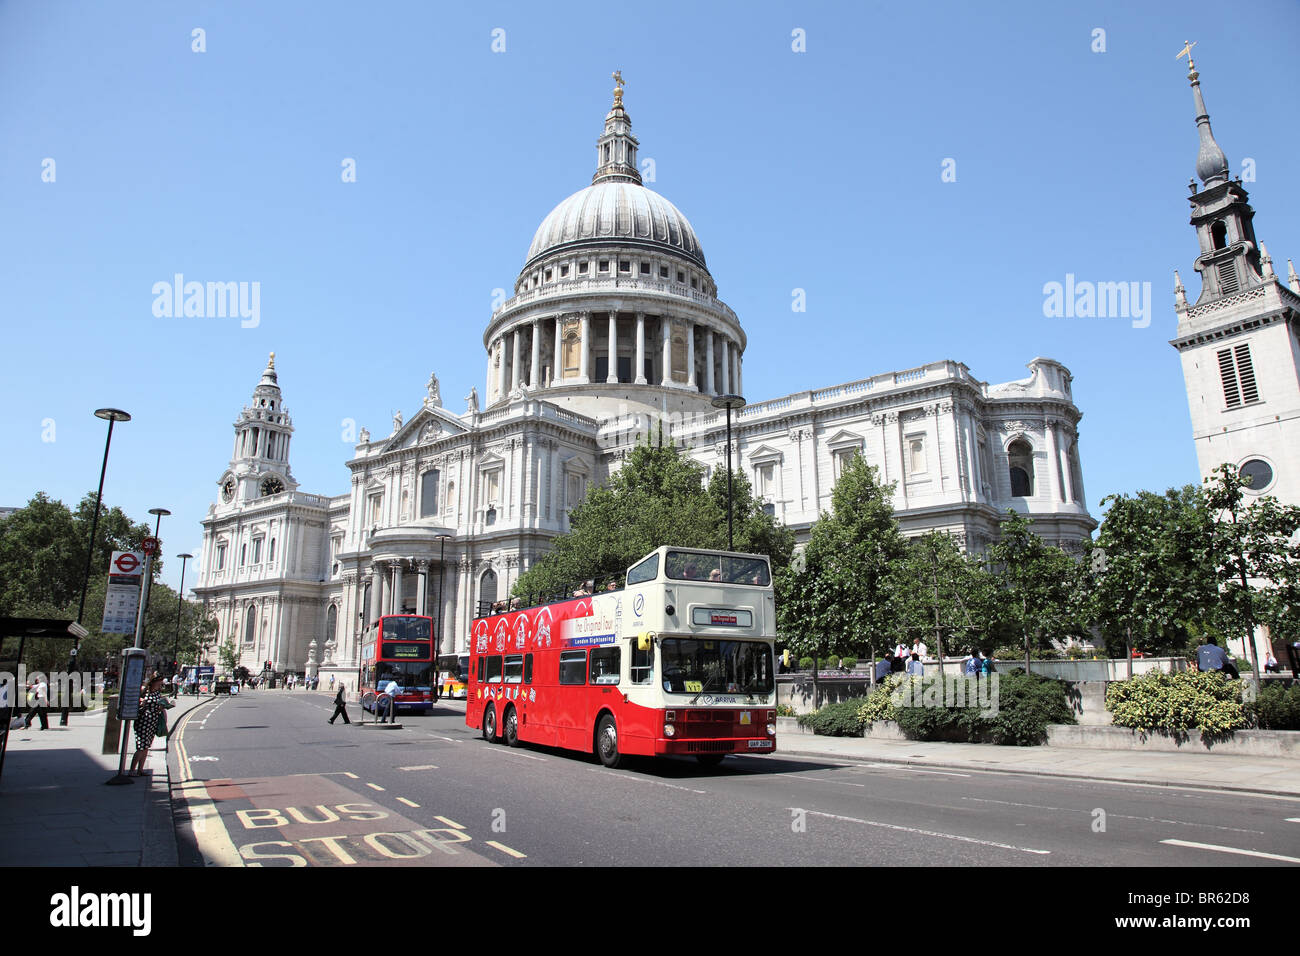 Red open top tourist bus outside St. Paul's Cathedral Stock Photo